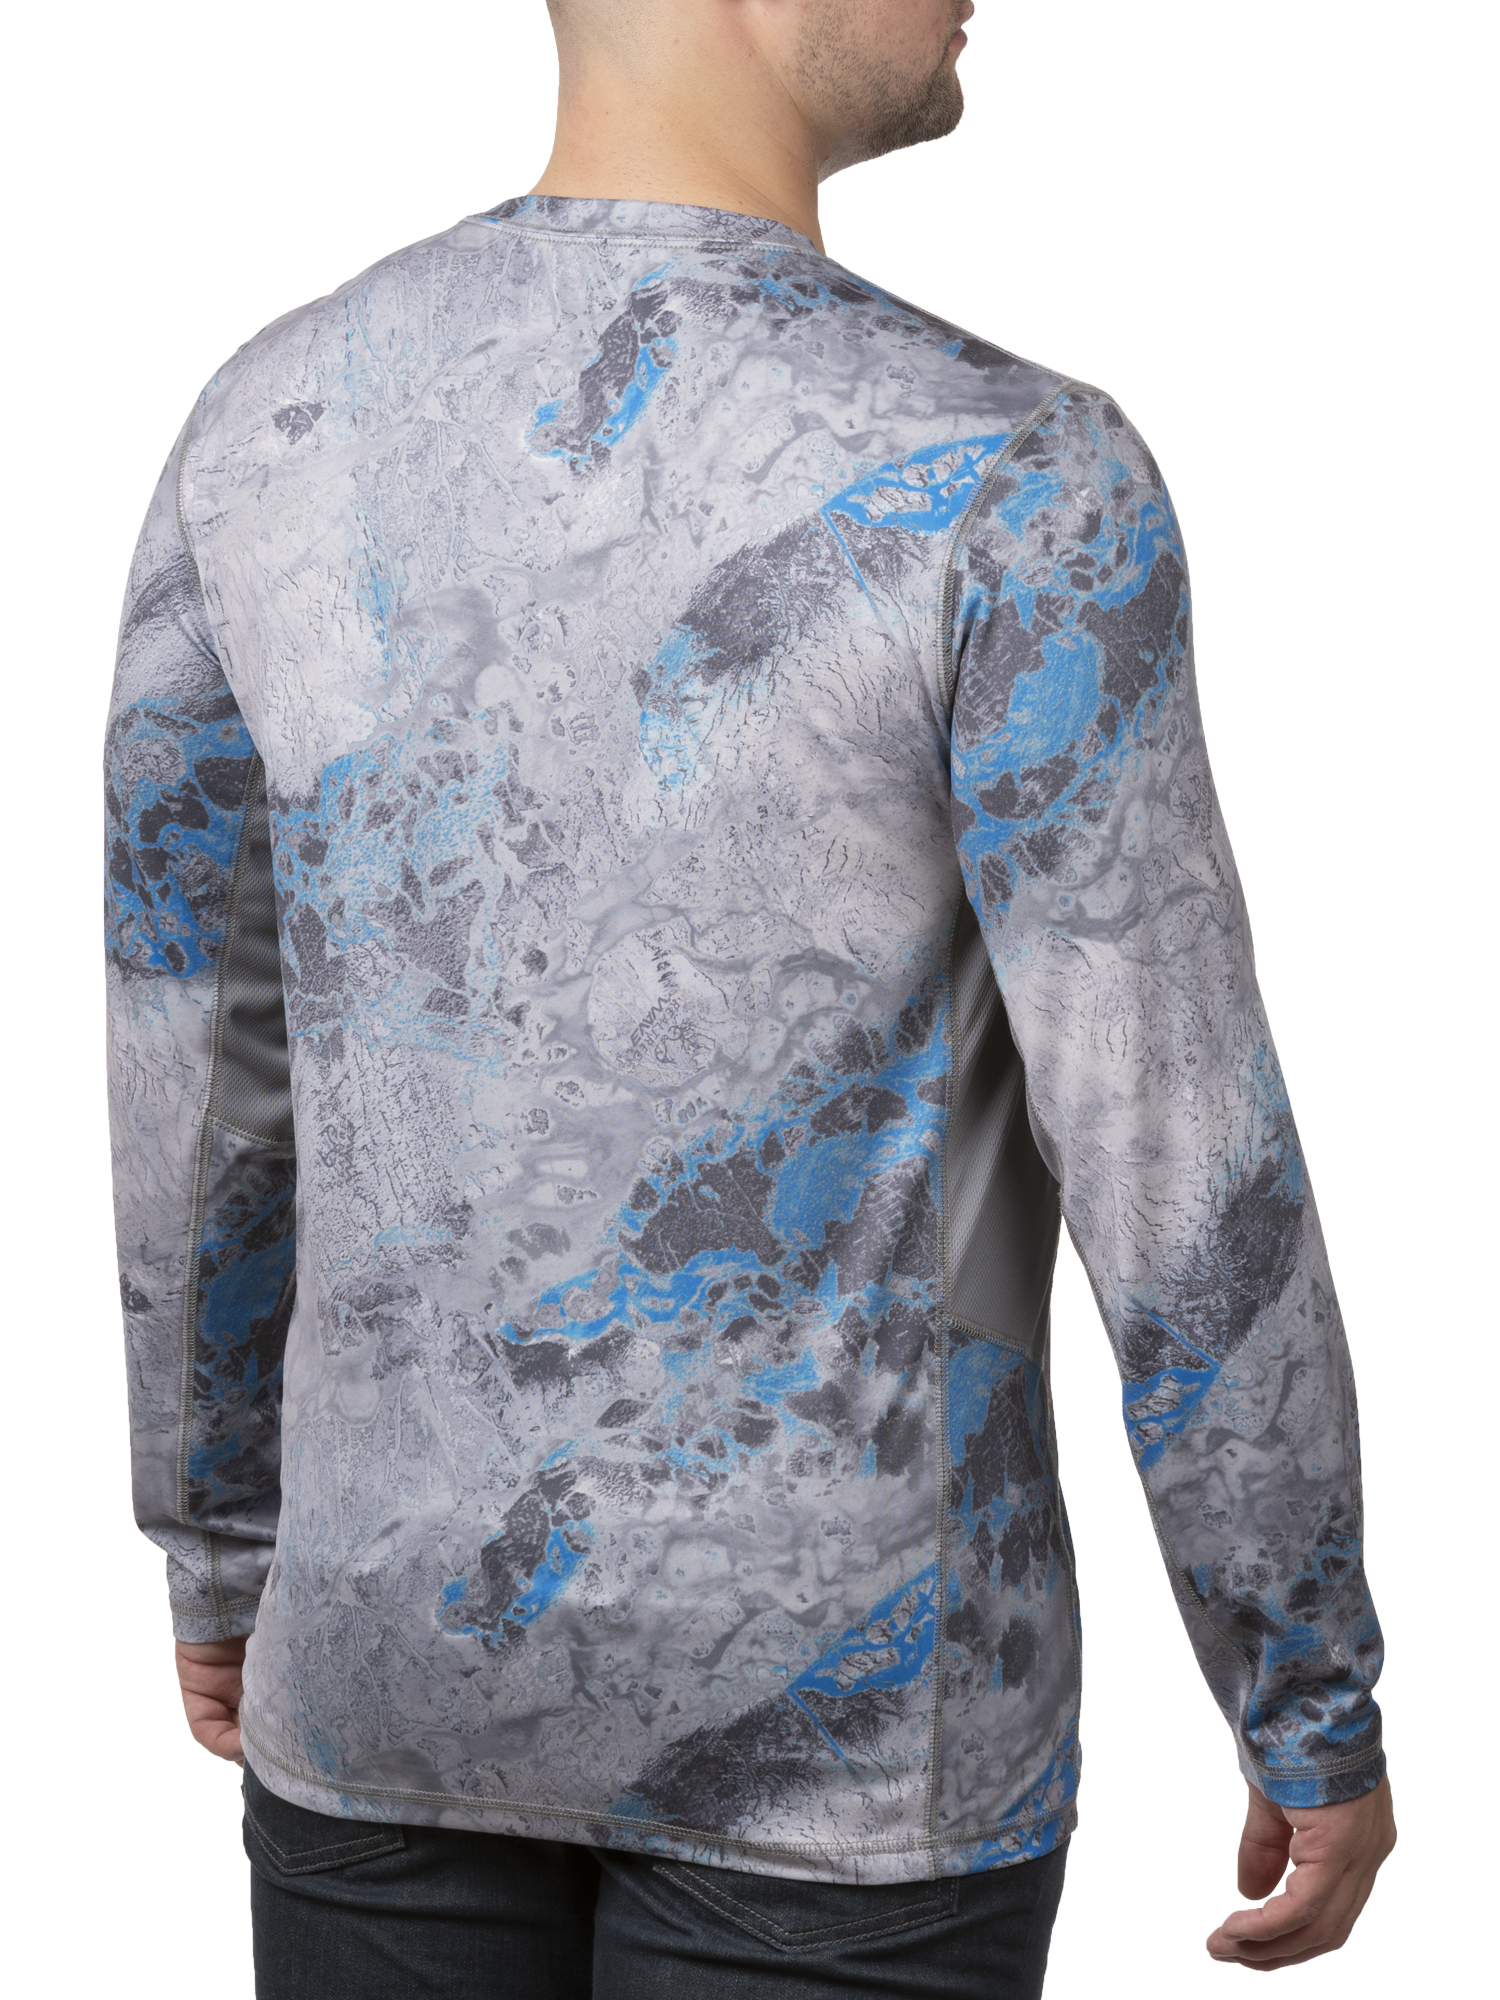 Realtree Long Sleeve Pullover Crew Neck Relaxed Fit T-Shirt (Men's) 1 Pack - image 3 of 3